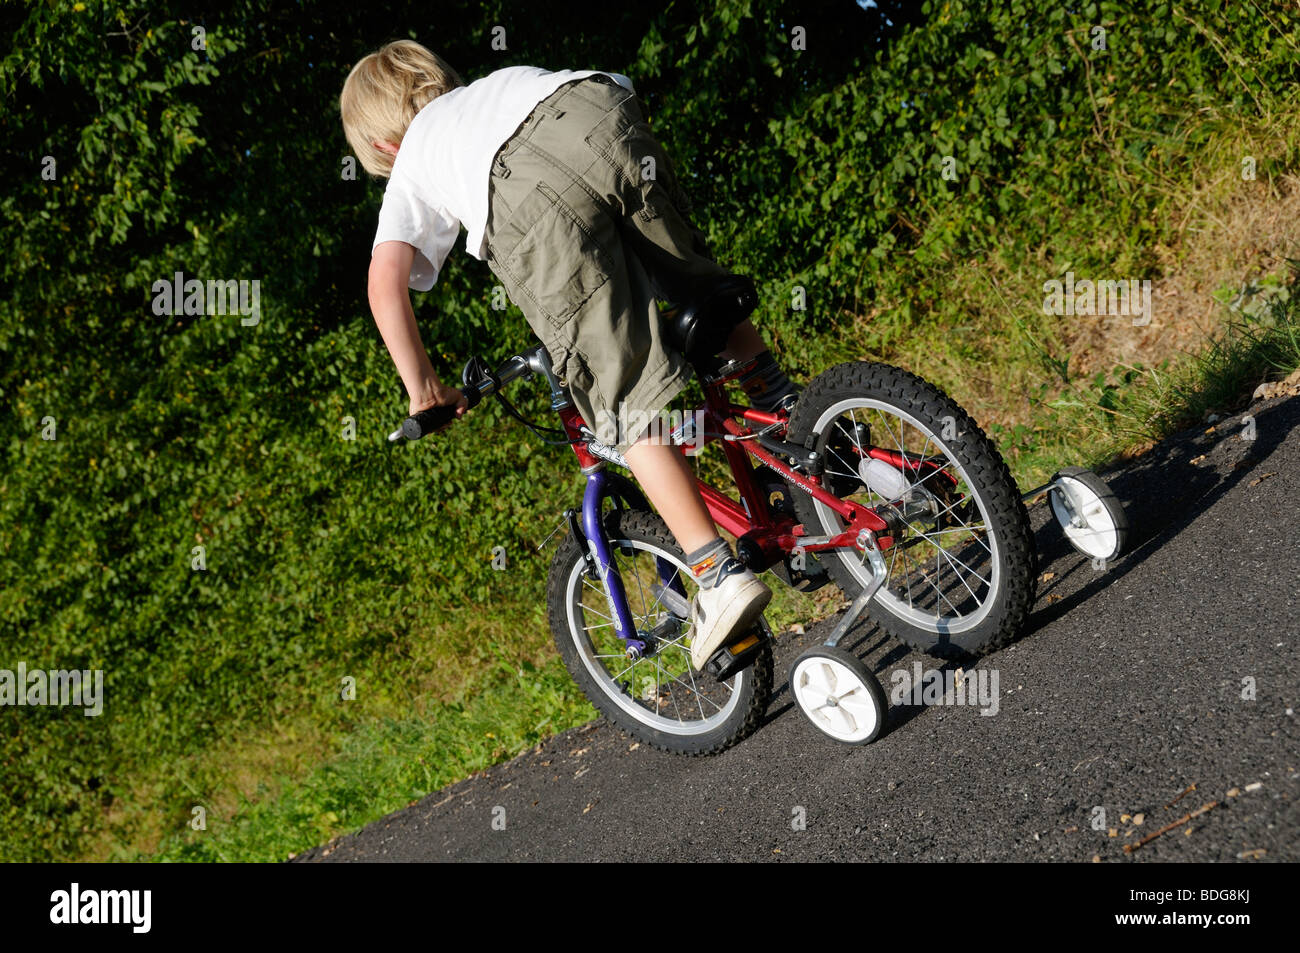 Stock photo of a young boy learning to ride his bike. Stock Photo